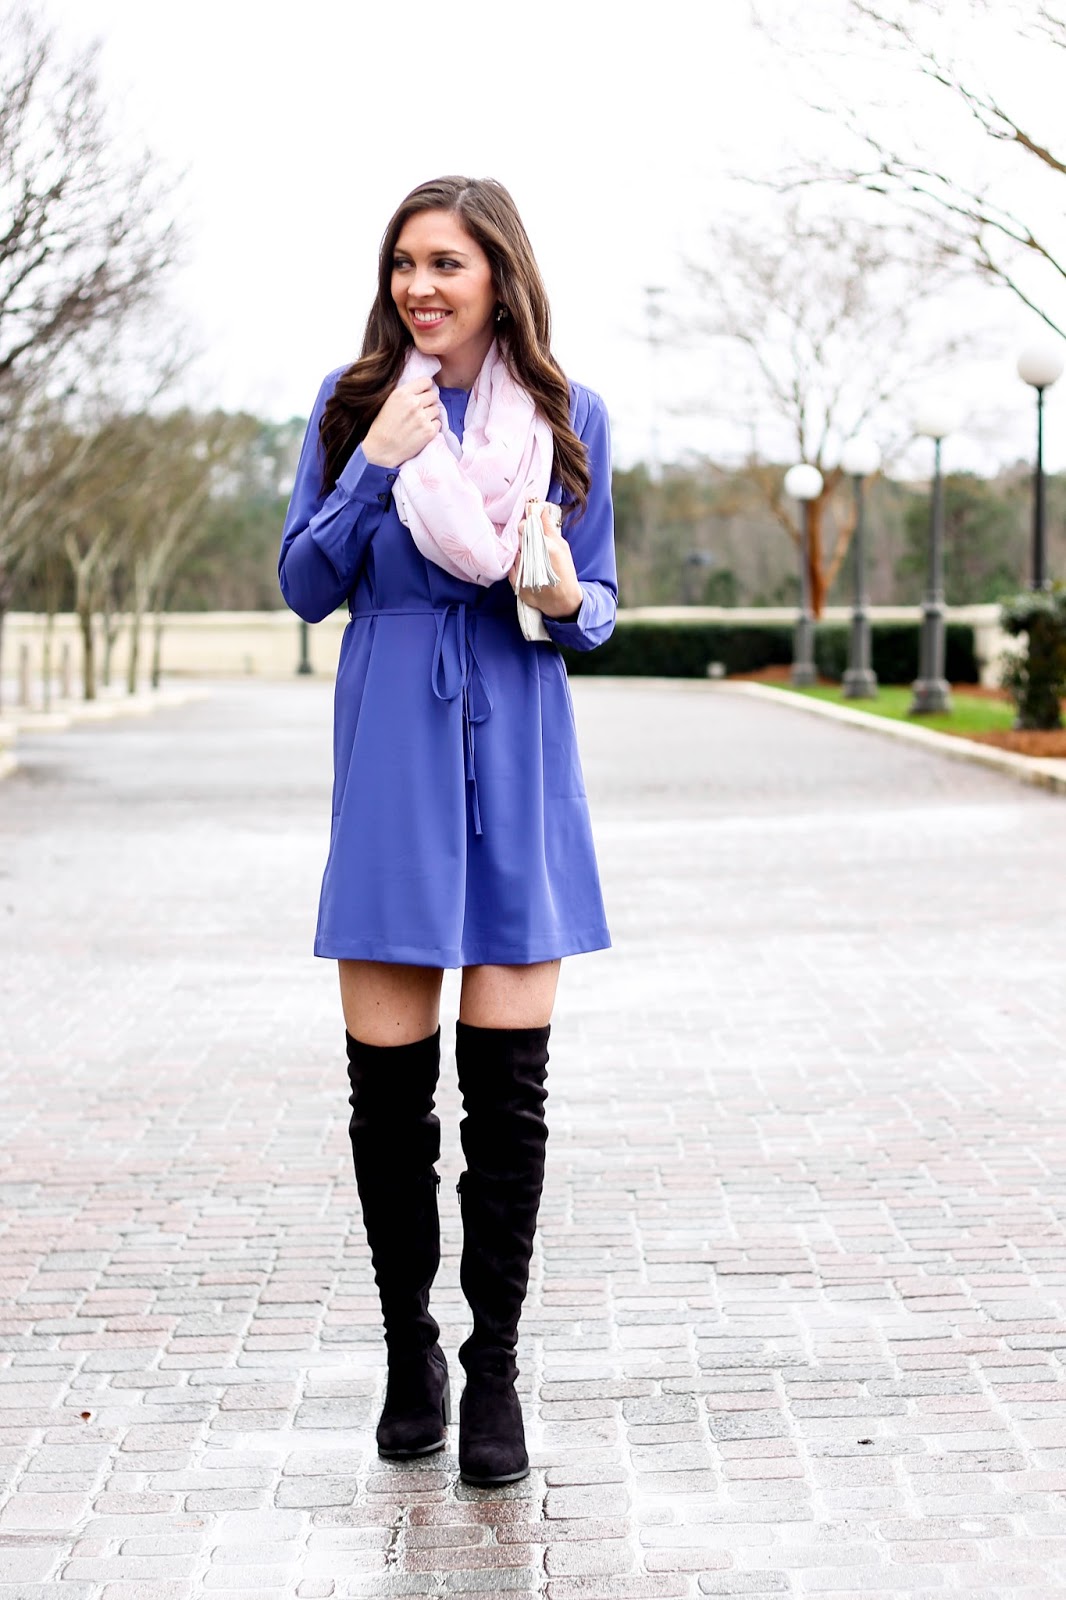 Purple Shirtdress, LOFT shirtdress, LOFT dress for winter and spring, work outfit ideas, winter outfit idea, winter trends, pastel scarf, nordstrom infinity scarf, black over the knee boots, suede boots, pretty in the pines, nc fashion blogger, fashion trends of 2016